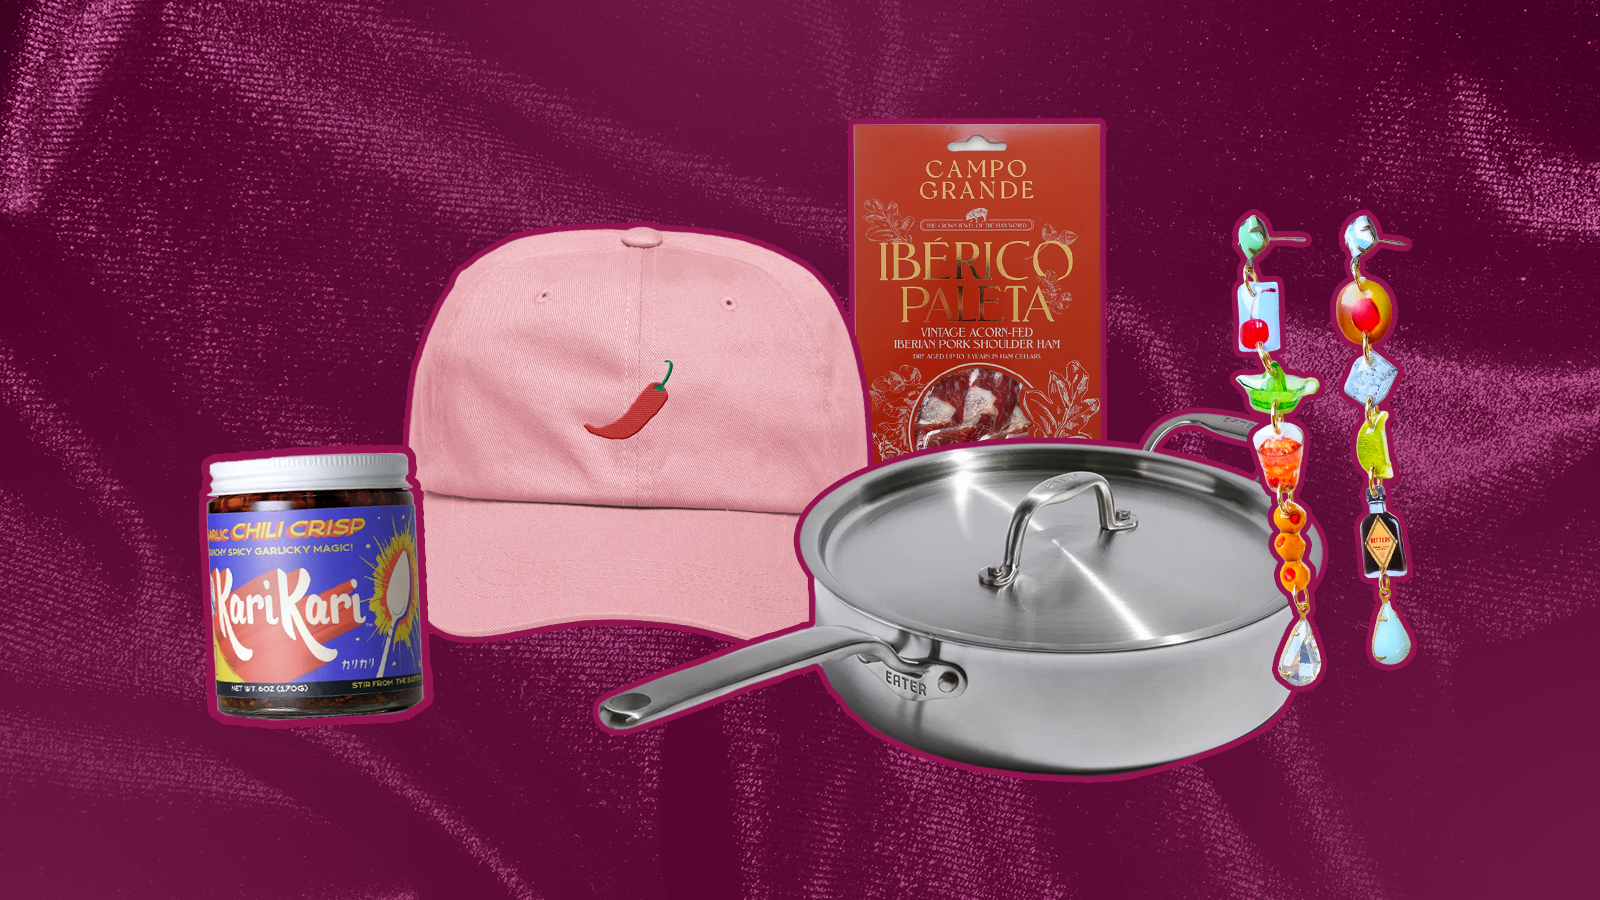 A collection of gifts, including chile crisp, a hat, a pan, charcuterie, and earrings, on a dark red background.